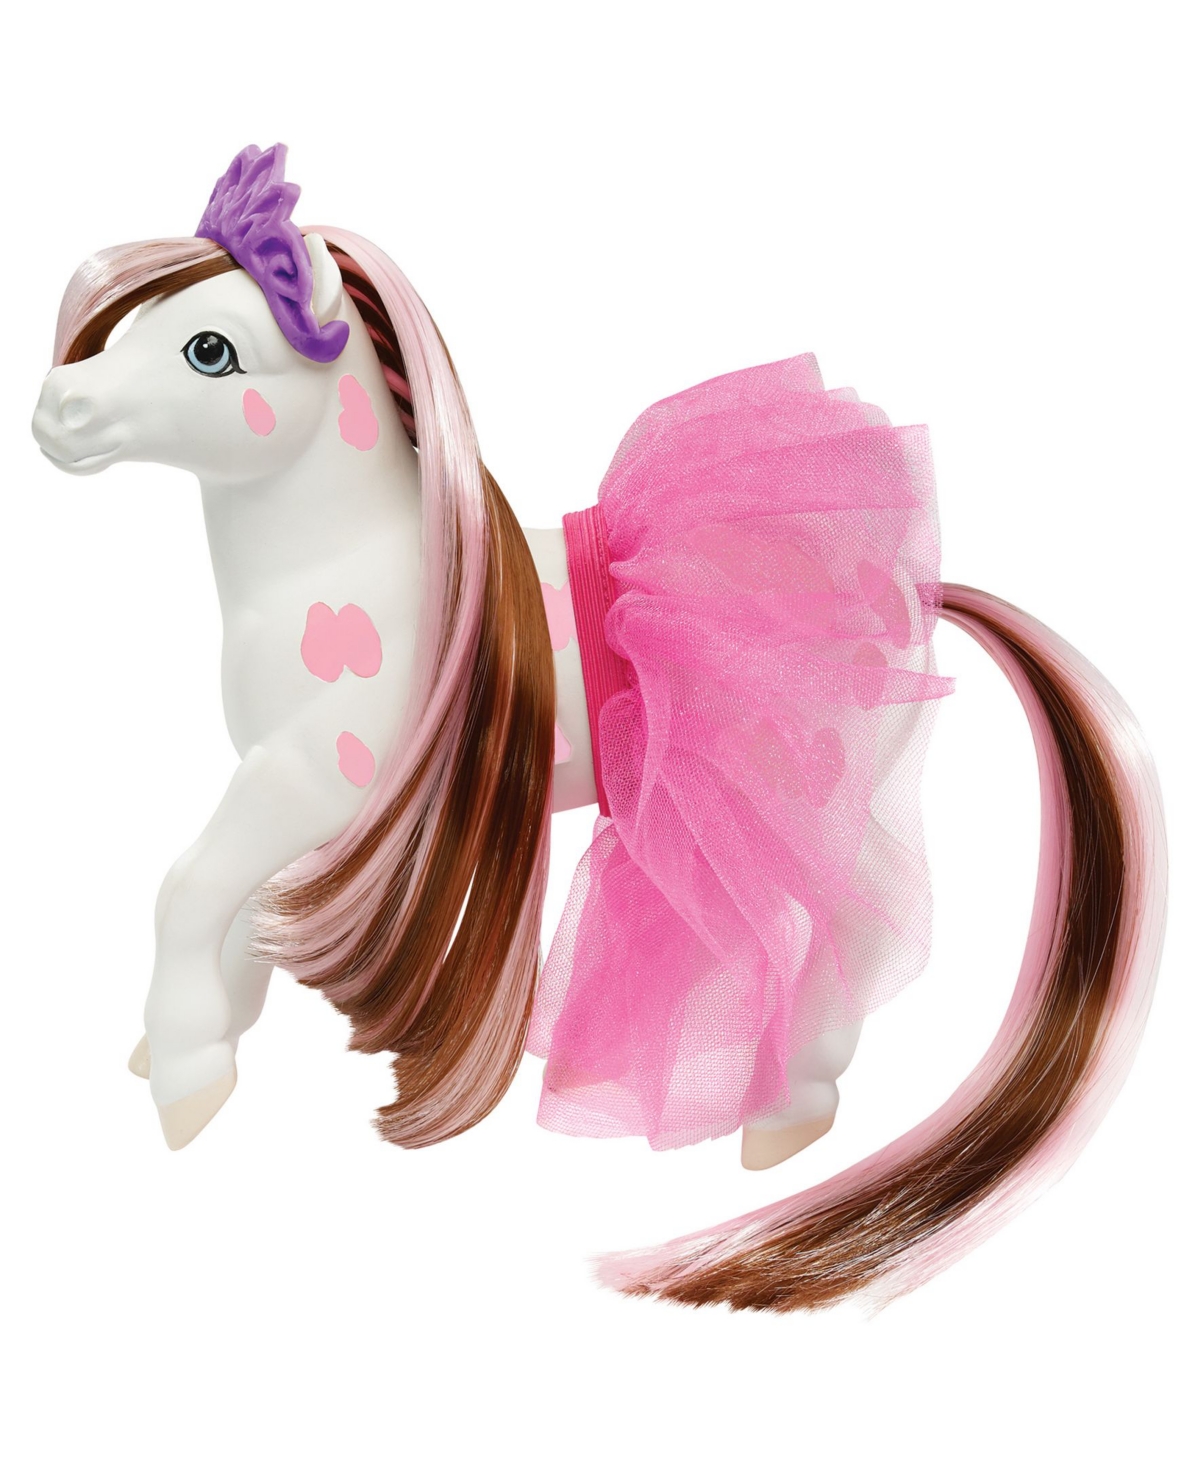 Shop Breyer Lucky Acres Blossom The Ballerina Horse Color Changing Bath Toy In Multi